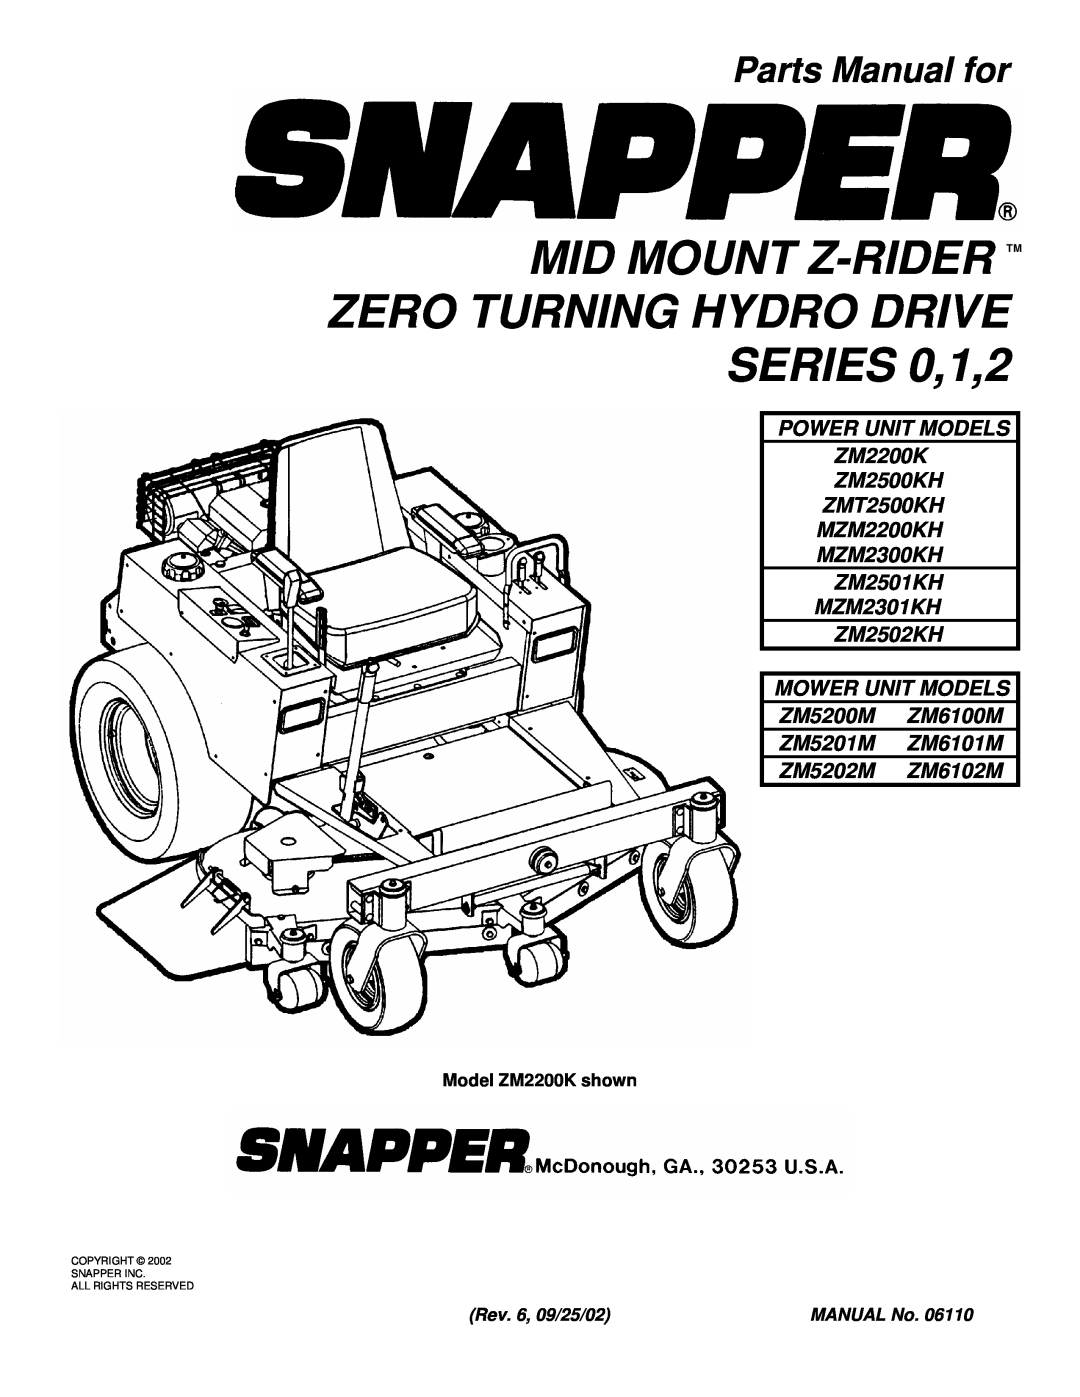 Snapper MZM2300KH manual Mid Mount Z-Rider Tm Zero Turning Hydro Drive, SERIES 0,1,2, Parts Manual for, ZM5202M ZM6102M 